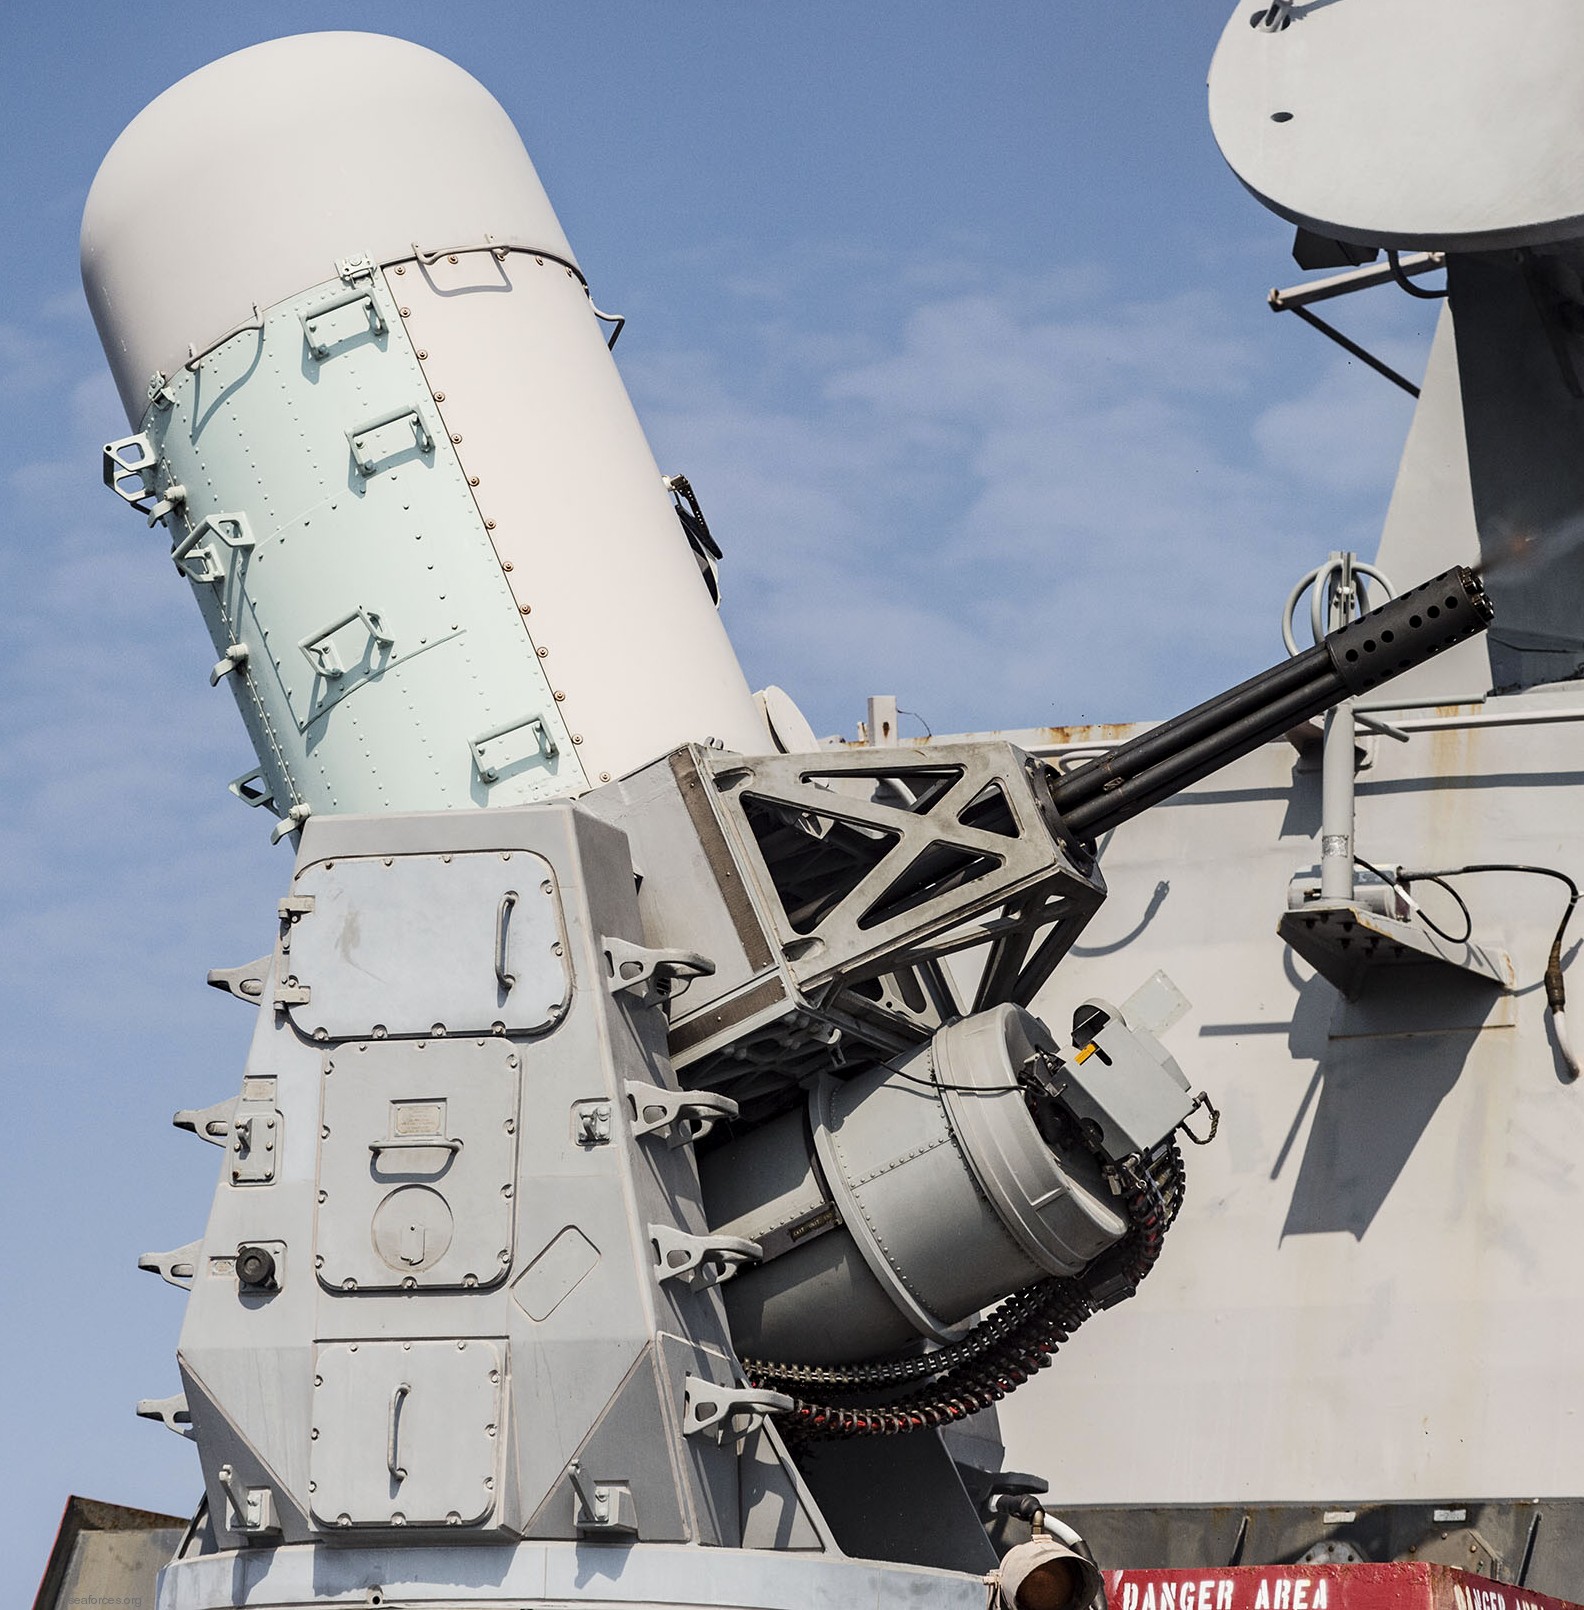 ddg-82 uss lassen arleigh burke class guided missile destroyer aegis 28 mk.15 phalanx close-in weapon system ciws